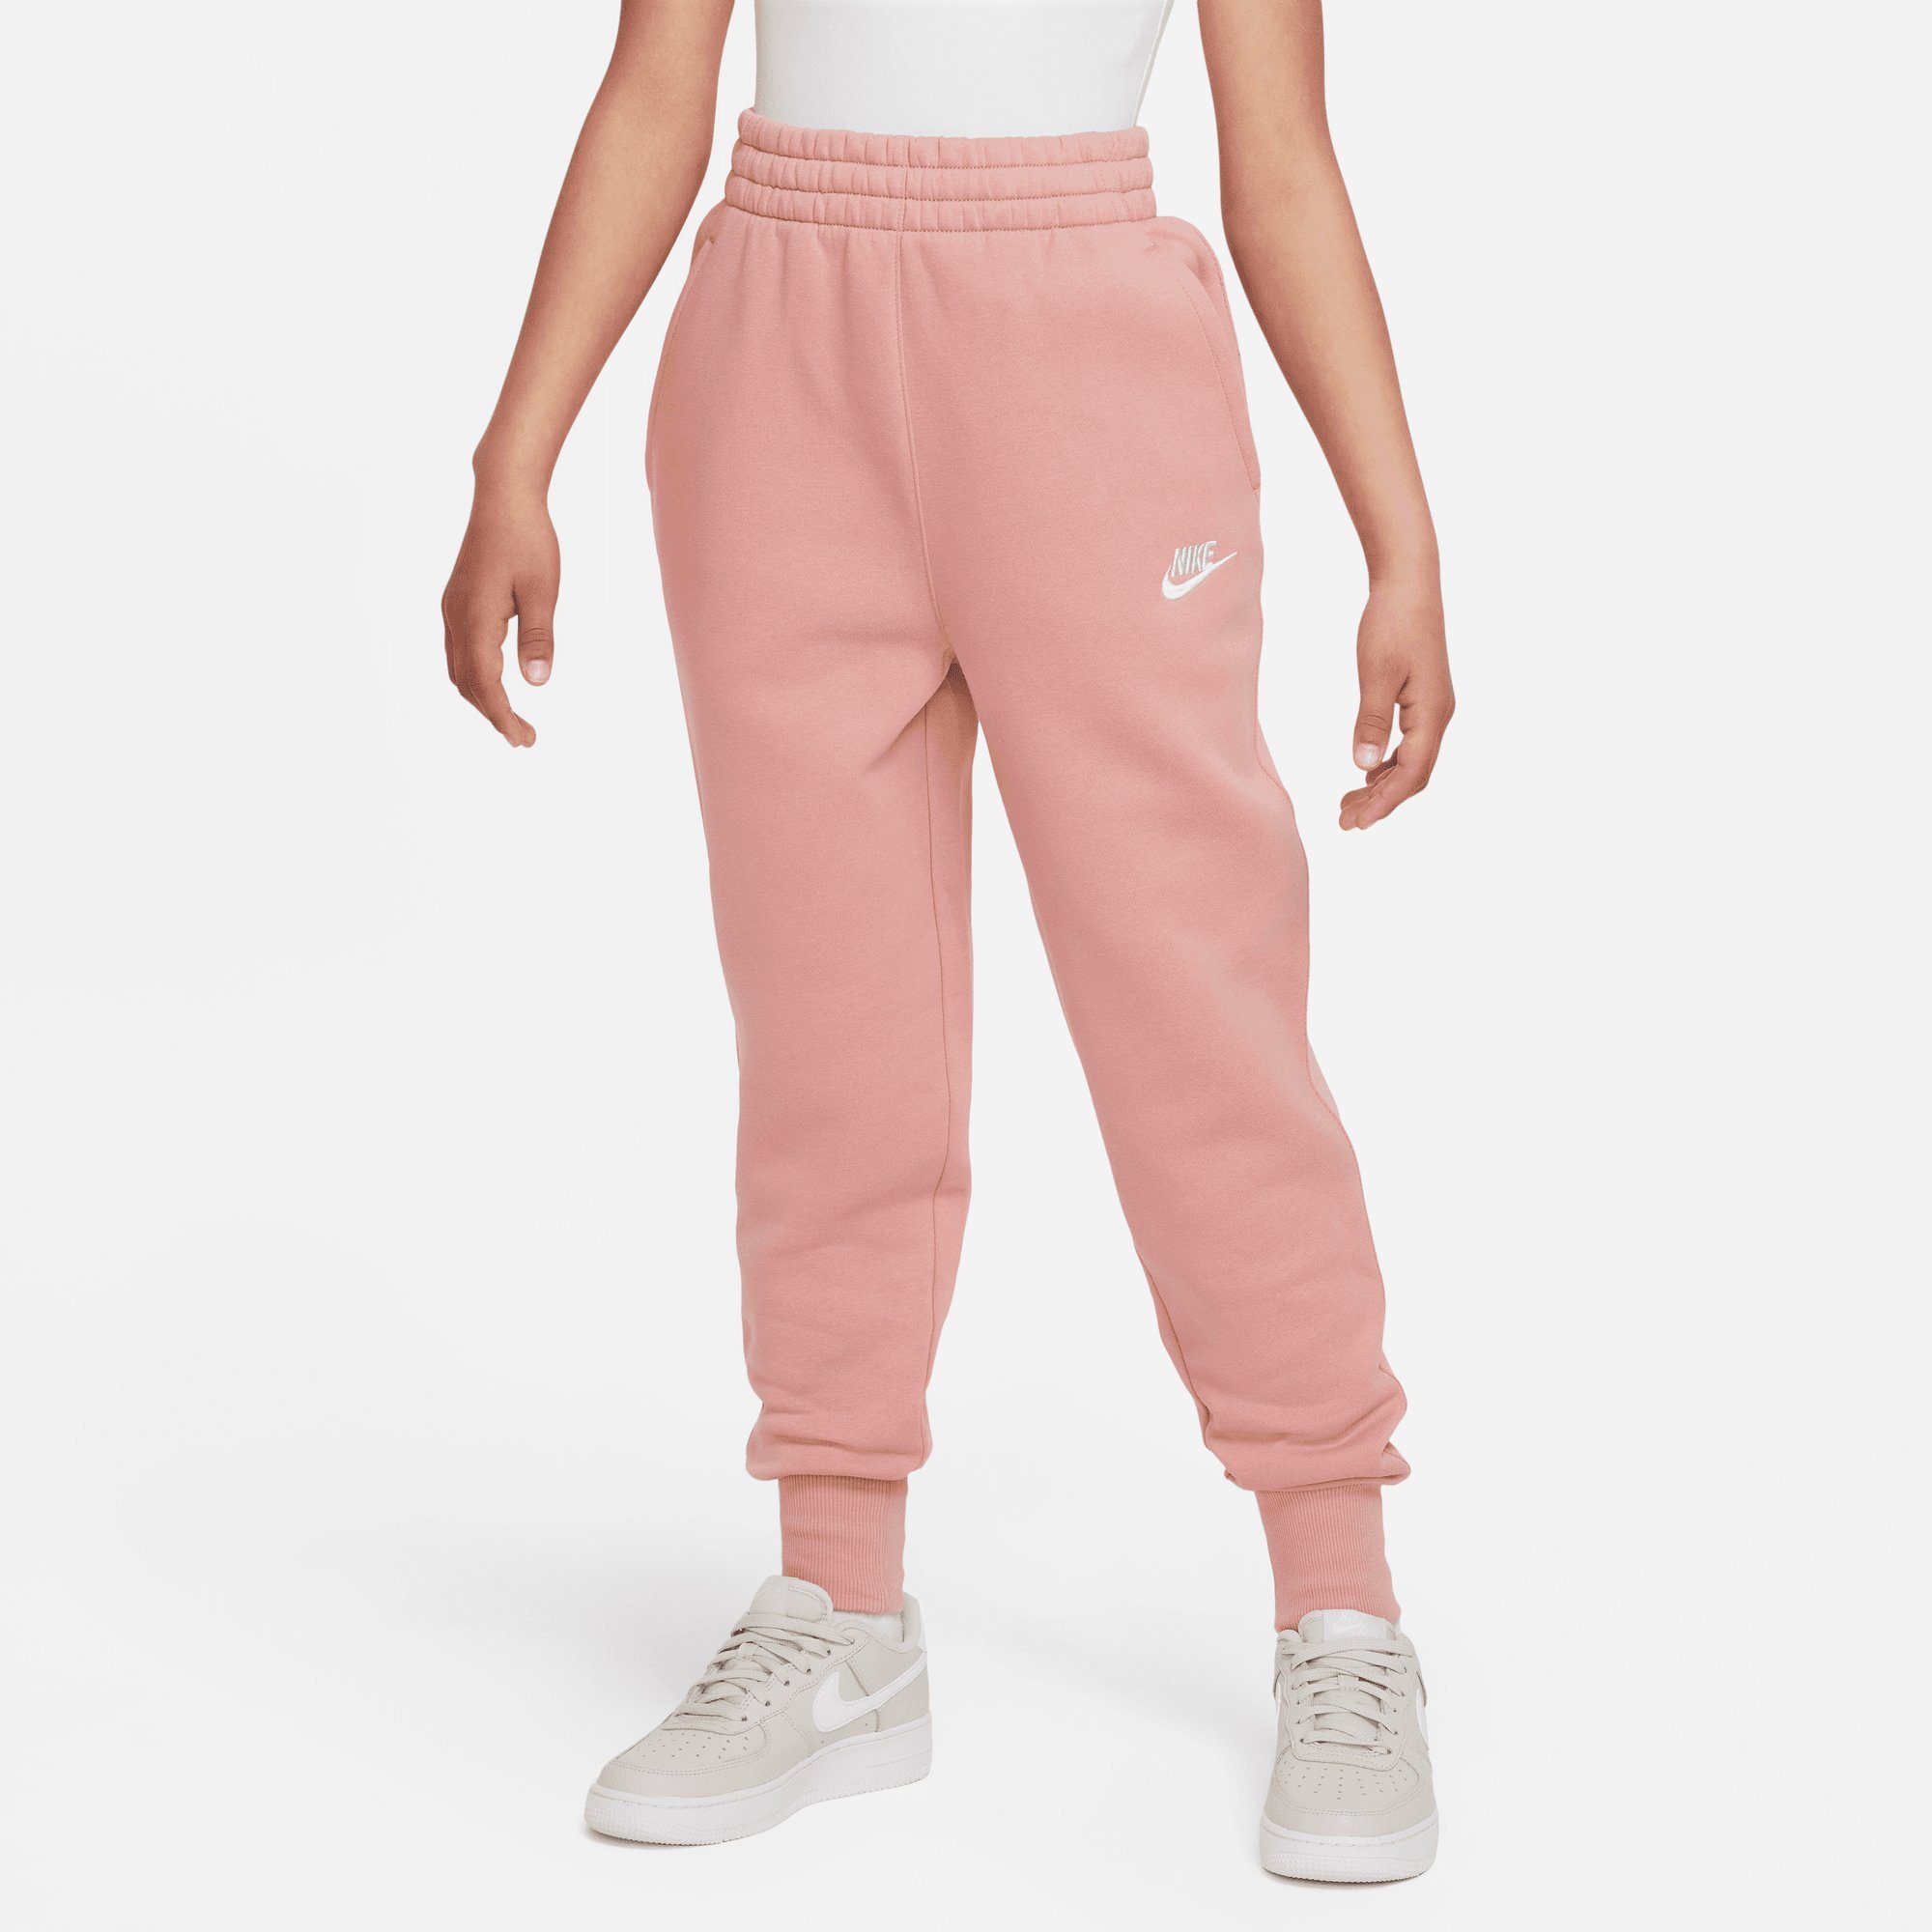 BIG Nike FLEECE Sportswear FITTED RED Jogginghose STARDUST/RED CLUB (GIRLS) STARDUST/WHITE PANTS HIGH-WAISTED KIDS'